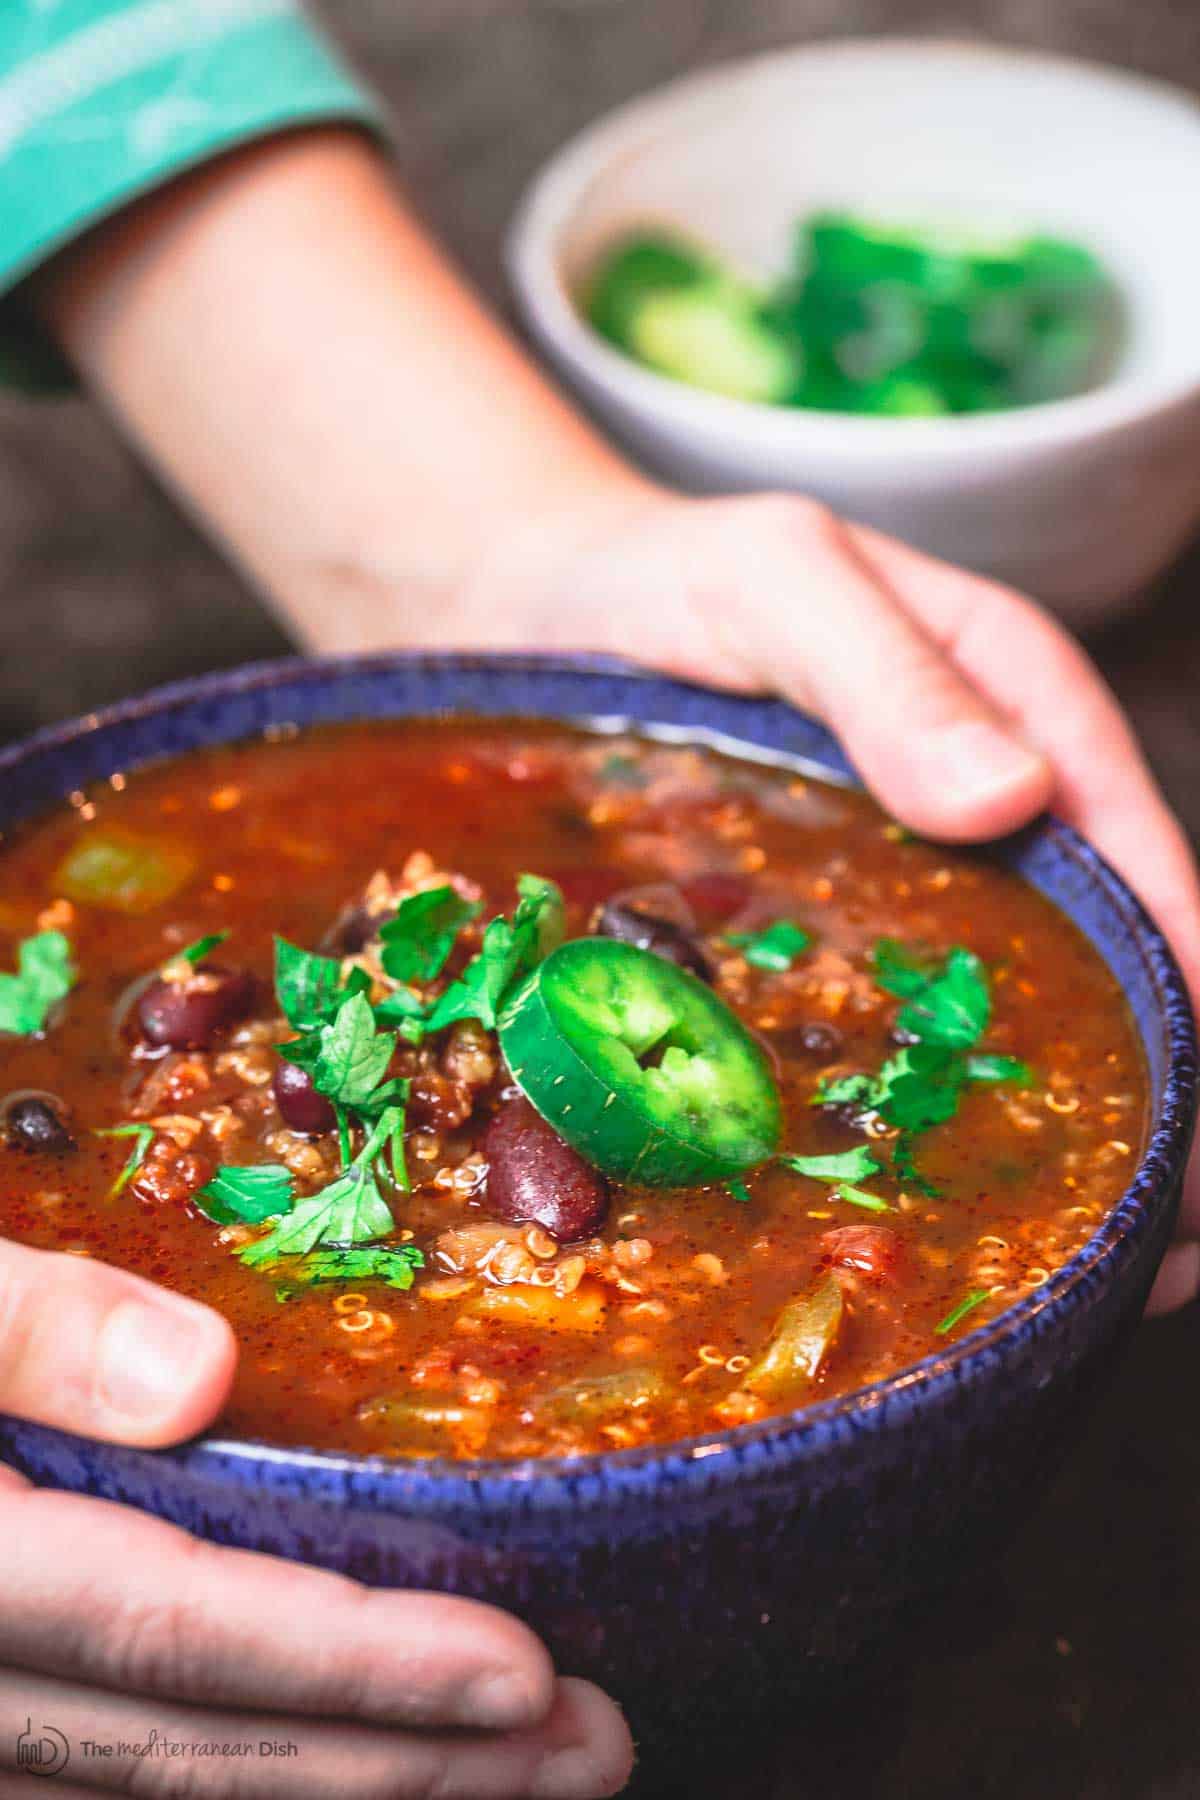 Dinner bowl of vegan chili held in two hands as it's placed on table. Topping the bowl of chili are some beans, fresh herbs and sliced jalapeno.